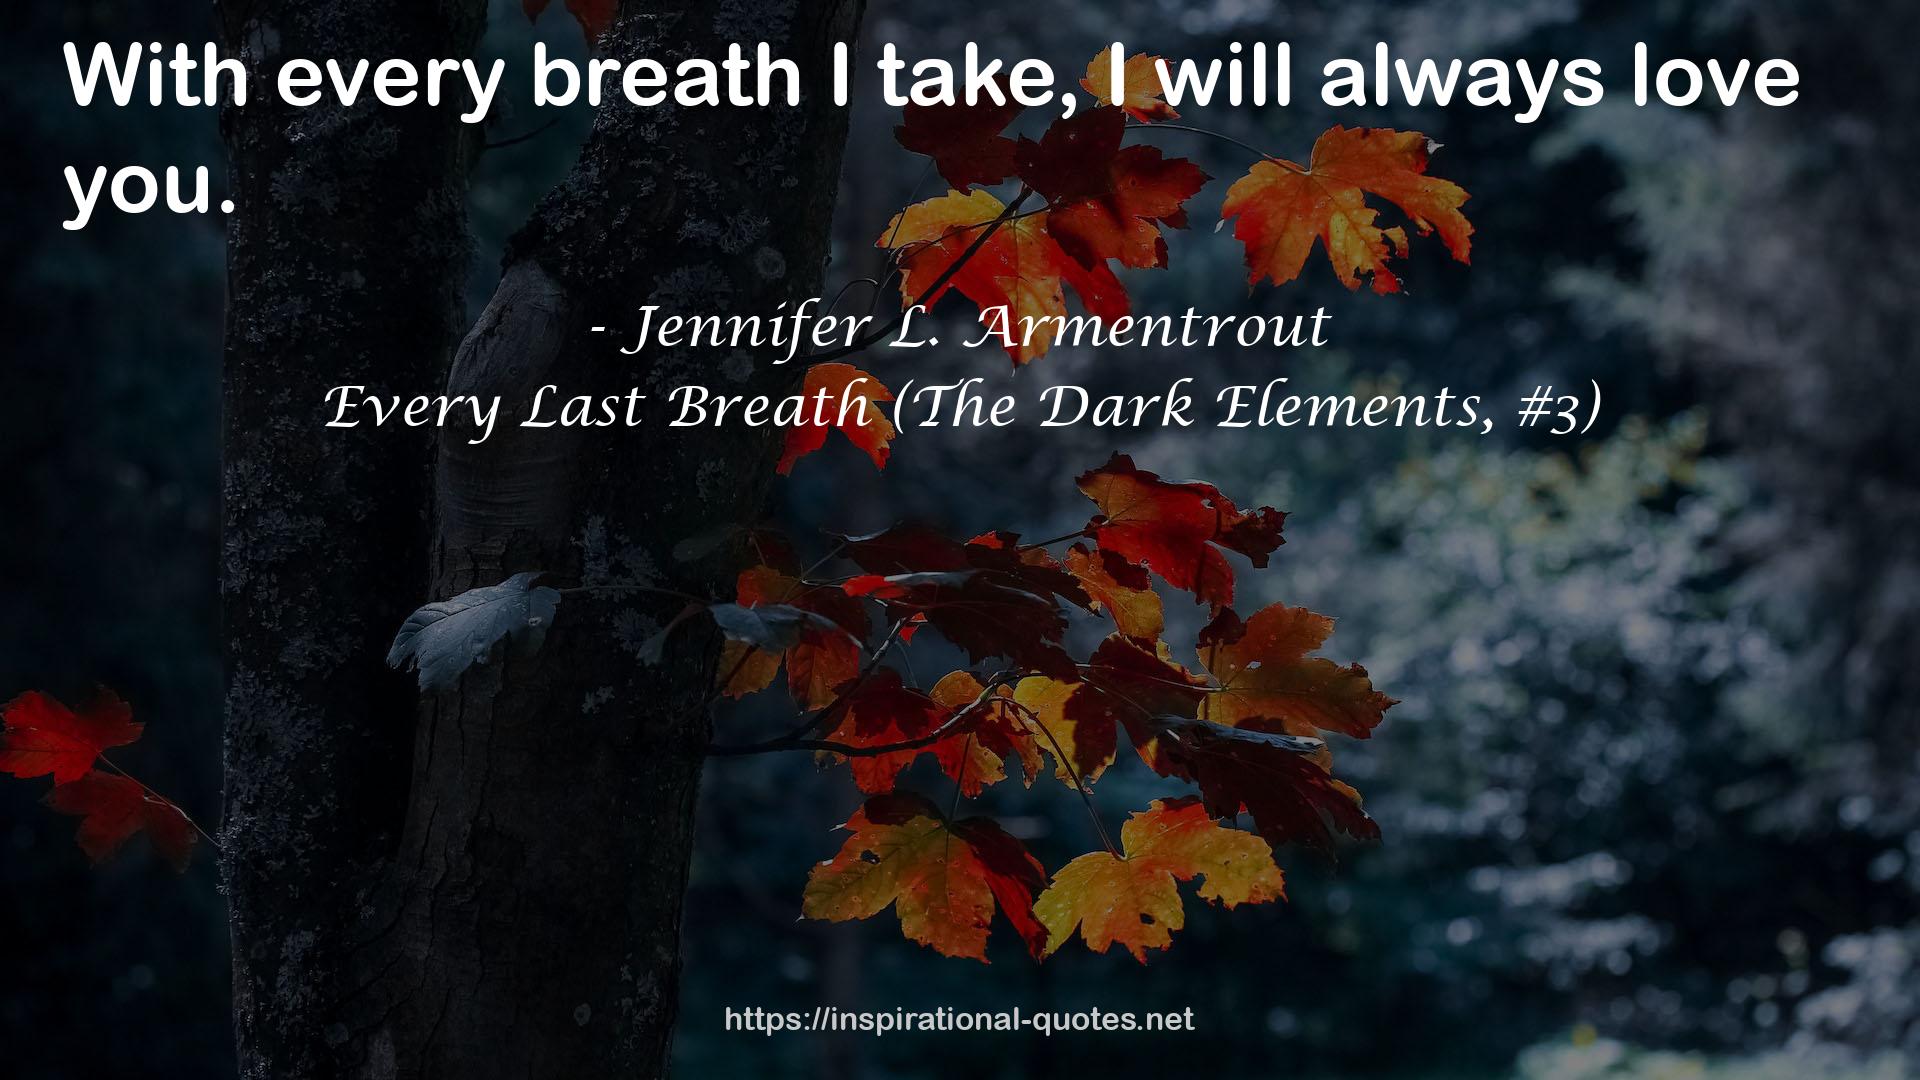 Every Last Breath (The Dark Elements, #3) QUOTES